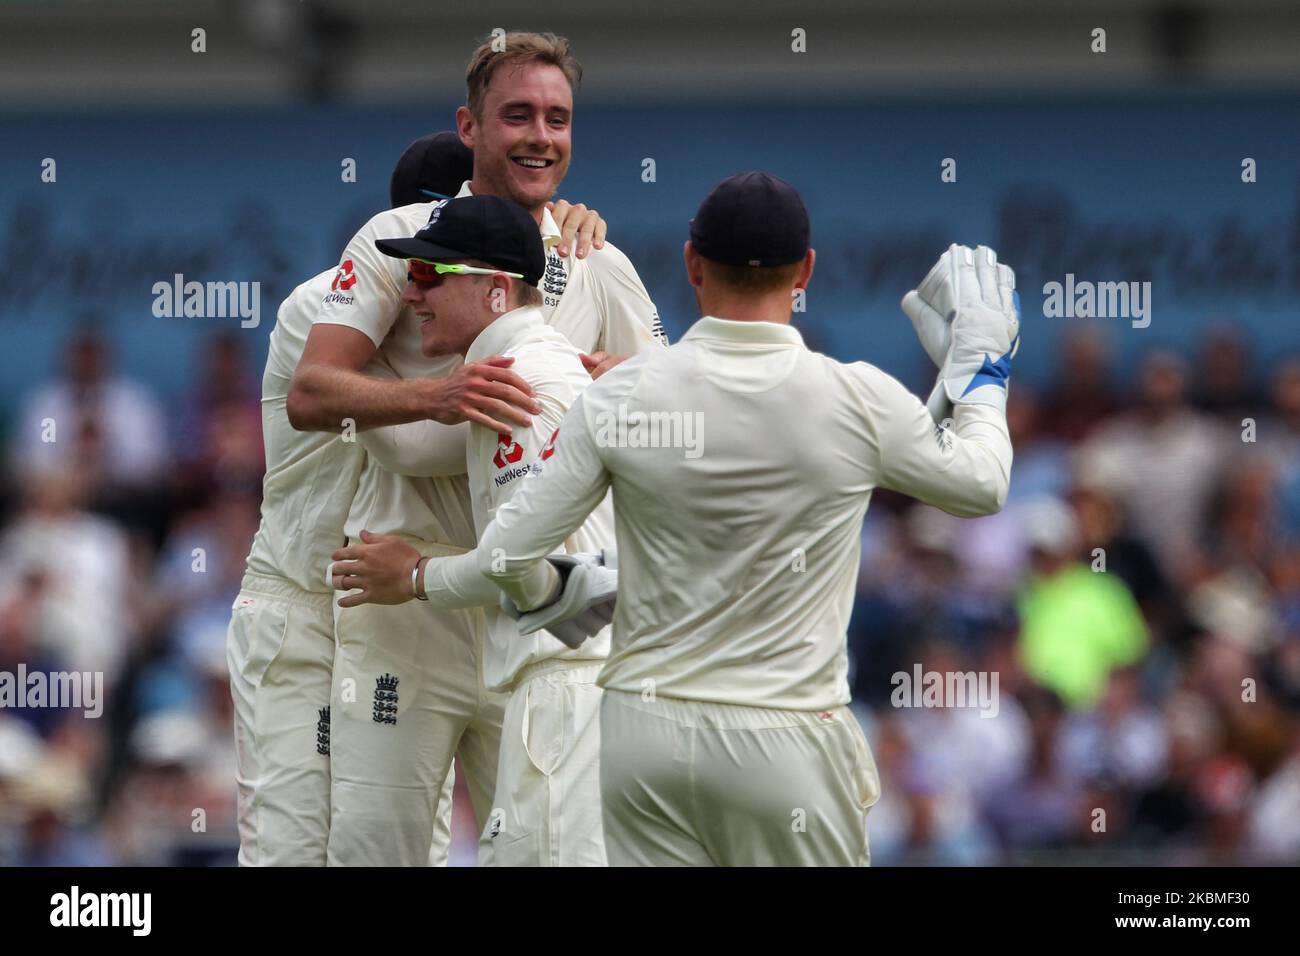 England's Stuart Broad celebrates with his team mates after claiming the wicket of Pakistan's Usman Salahuddin during the first day of the Second Nat West Test match between England and Pakistan at Headingley Cricket Ground, Leeds on Friday 1st June 2018. (Photo by Mark Fletcher/MI News/NurPhoto) Stock Photo